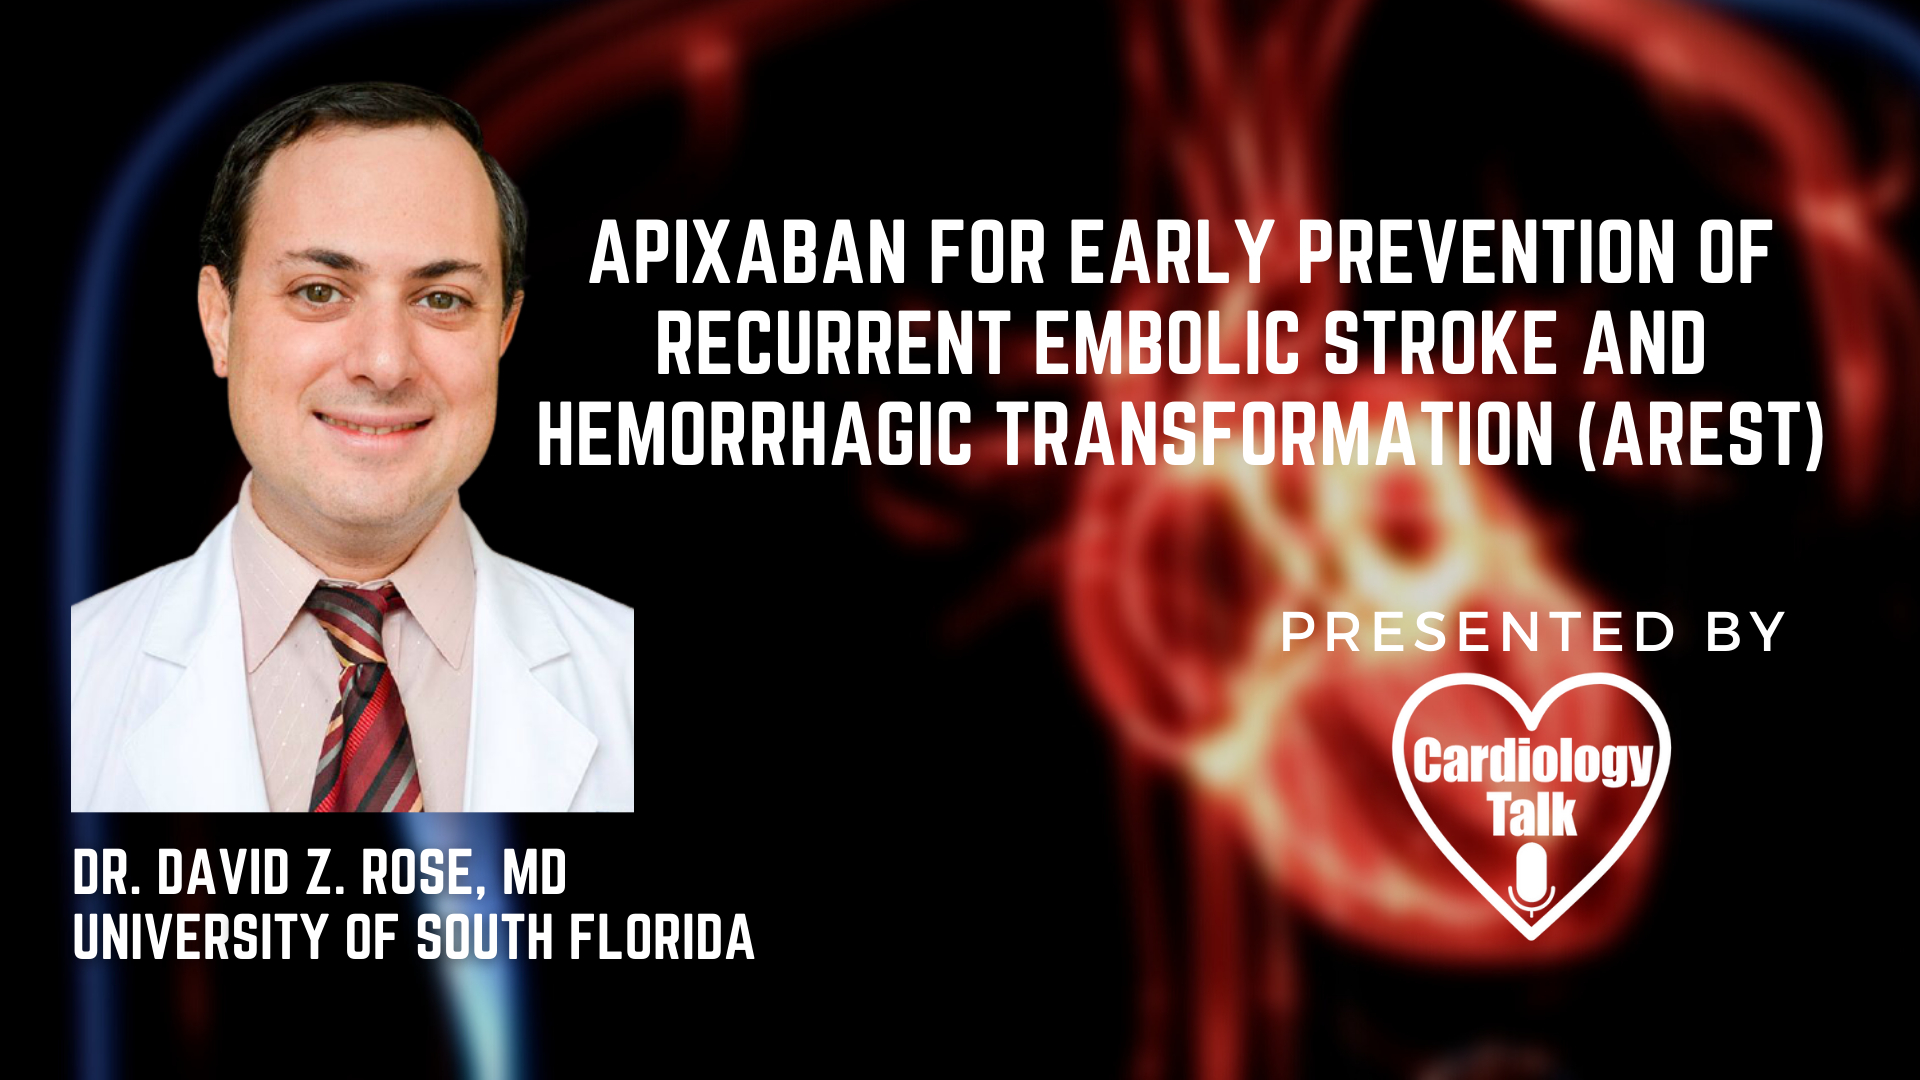 Dr. David Z. Rose, MD - Apixaban for Early Prevention of Recurrent Embolic Stroke and Hemorrhagic Transformation (AREST)